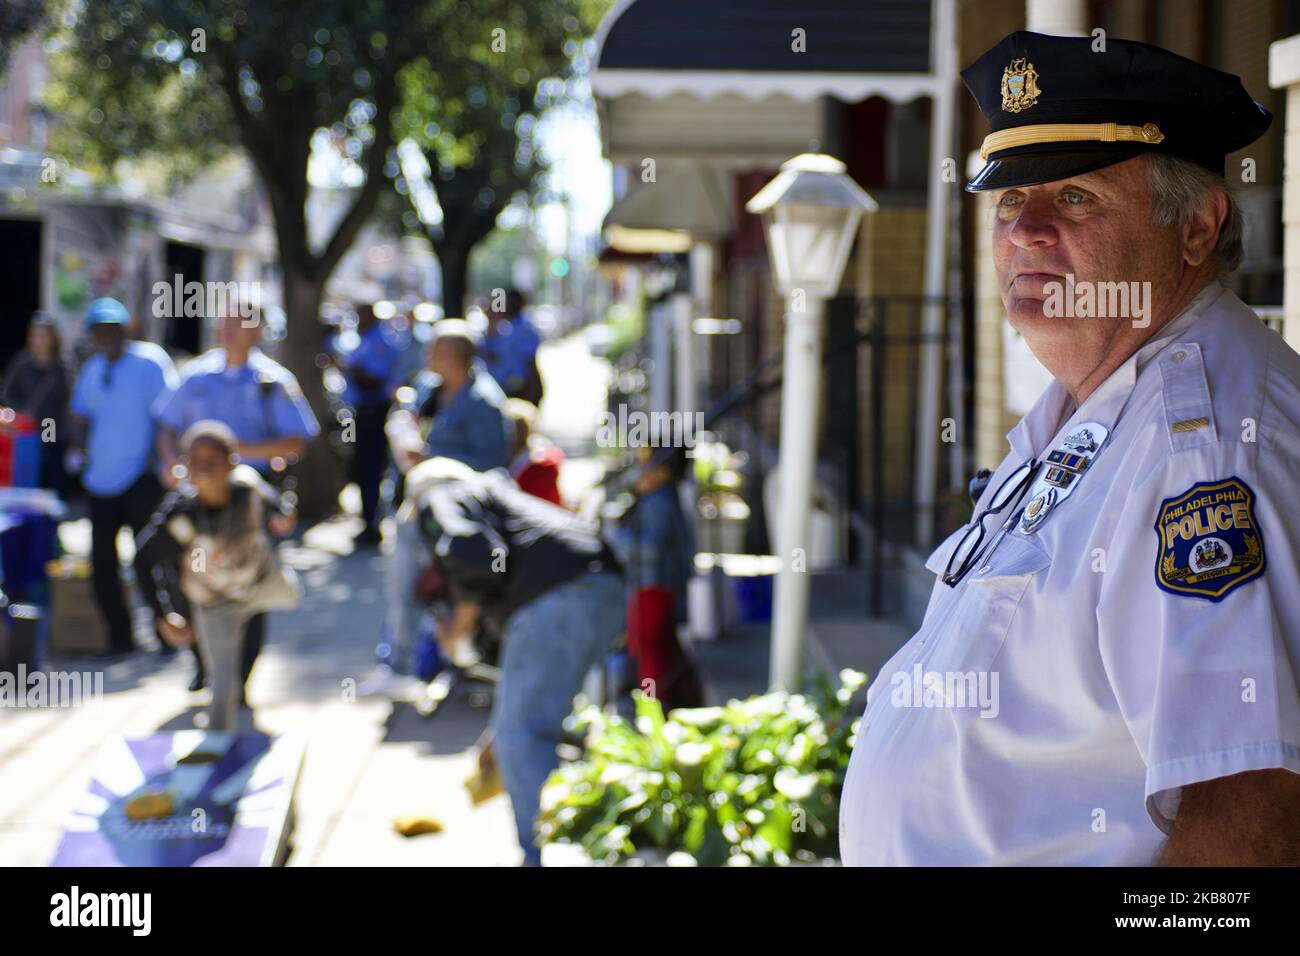 Police officers interact with youth from the community during a block party on Sunday October 5, 2019 at the site of the August Police shooting and hours long stand off that followed, in the Nicetown-Tioga section of Philadelphia, PA. (Photo by Bastiaan Slabbers/NurPhoto) Stock Photo